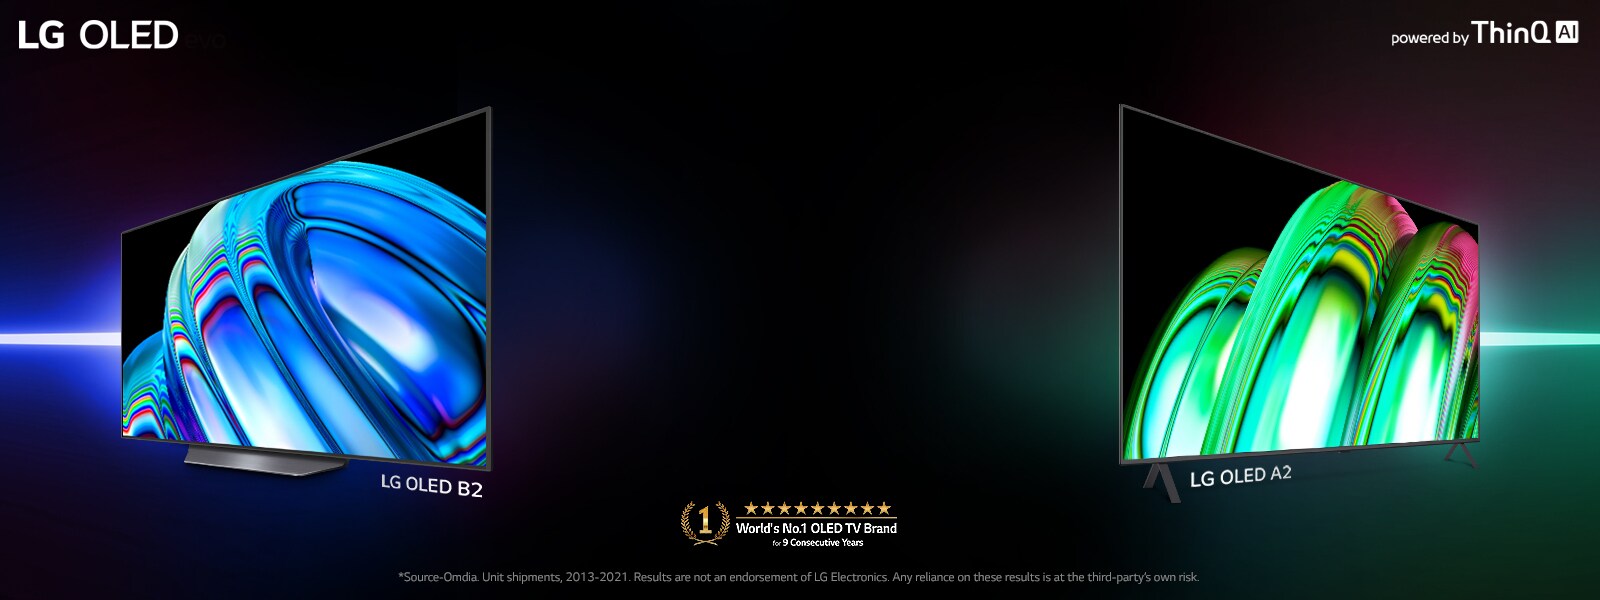 LG OLED B2 and LG OLED A2 stand against a black backdrop. LG OLED B2 tilts to the left and displays a blue abstract image. LG OLED A2 tilts to the right and displays a green abstract image.			